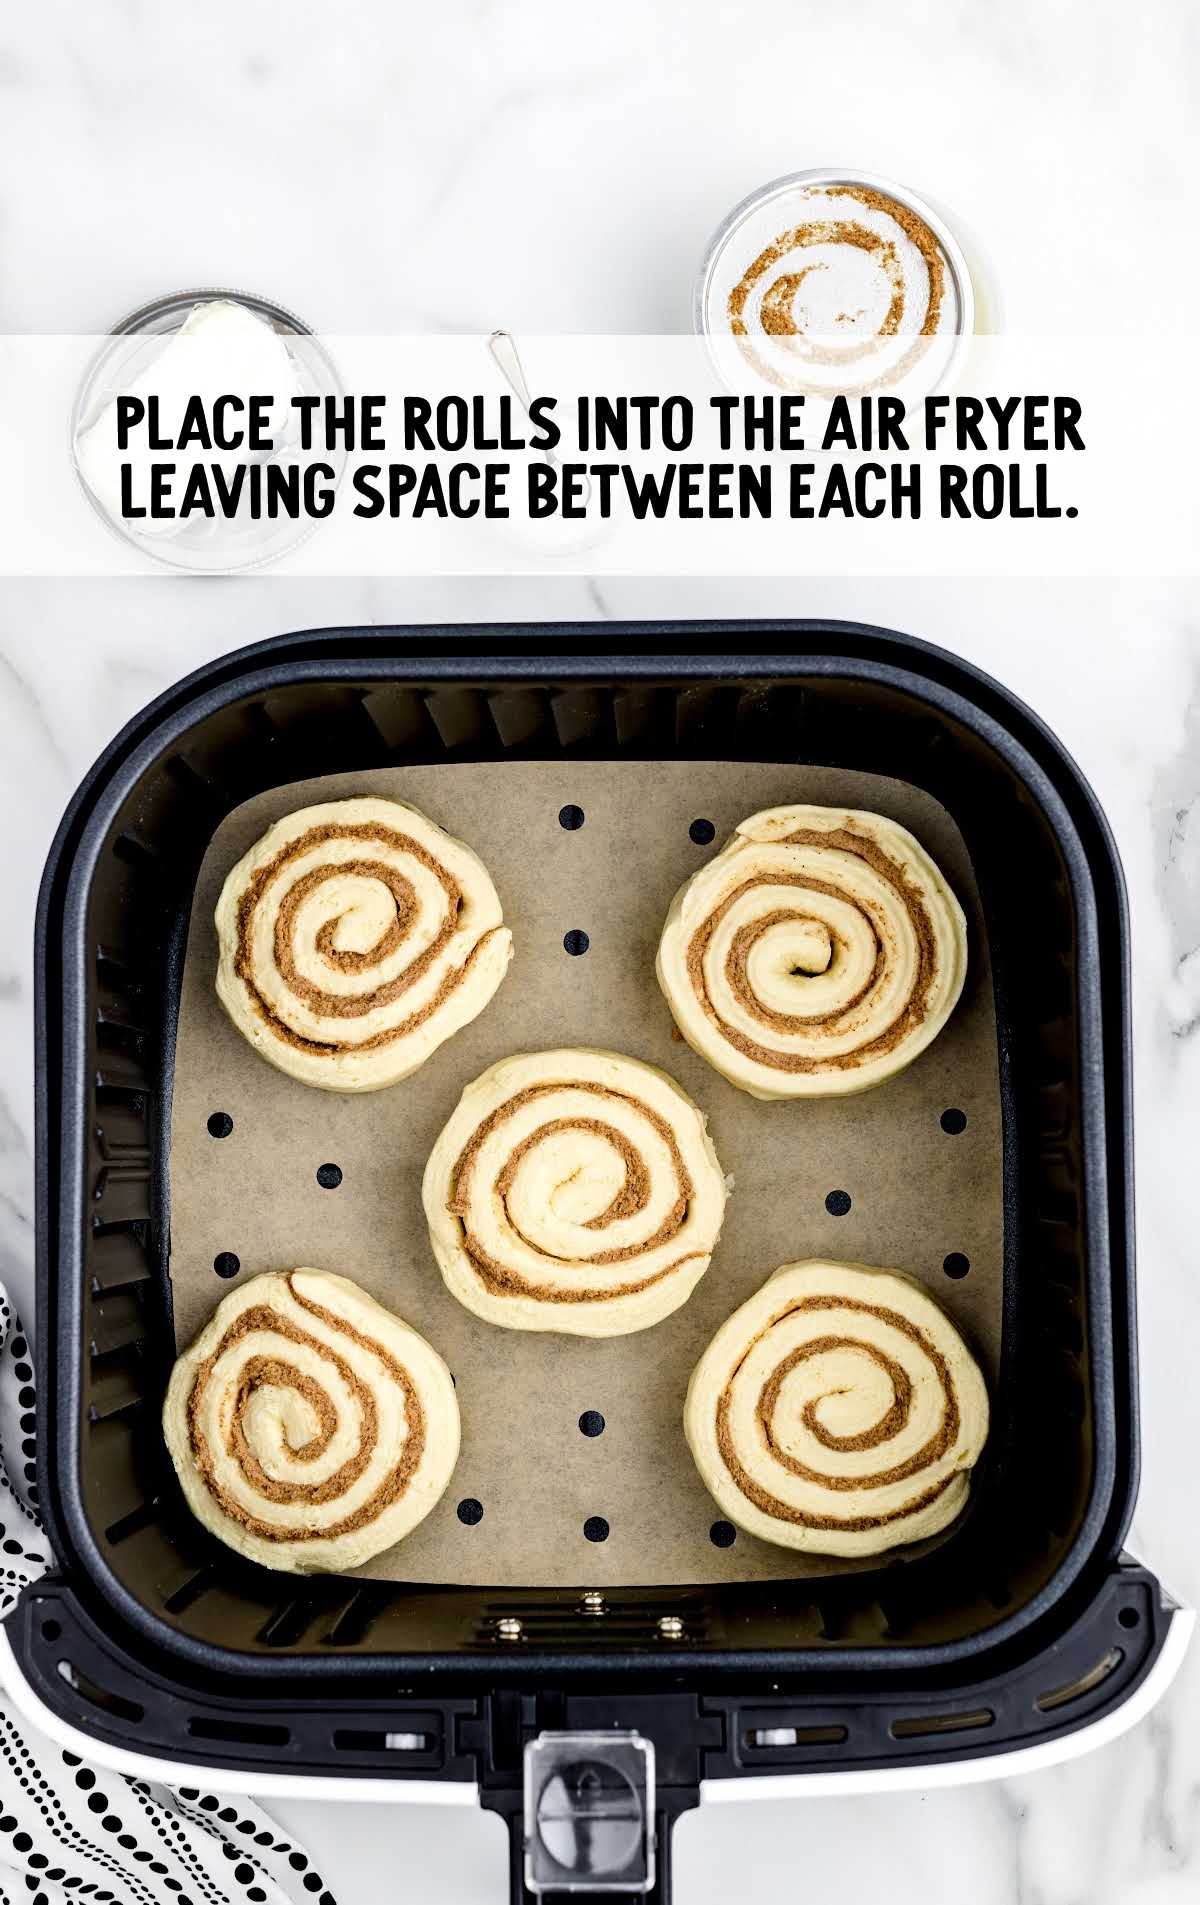 rolls placed into the air fryer